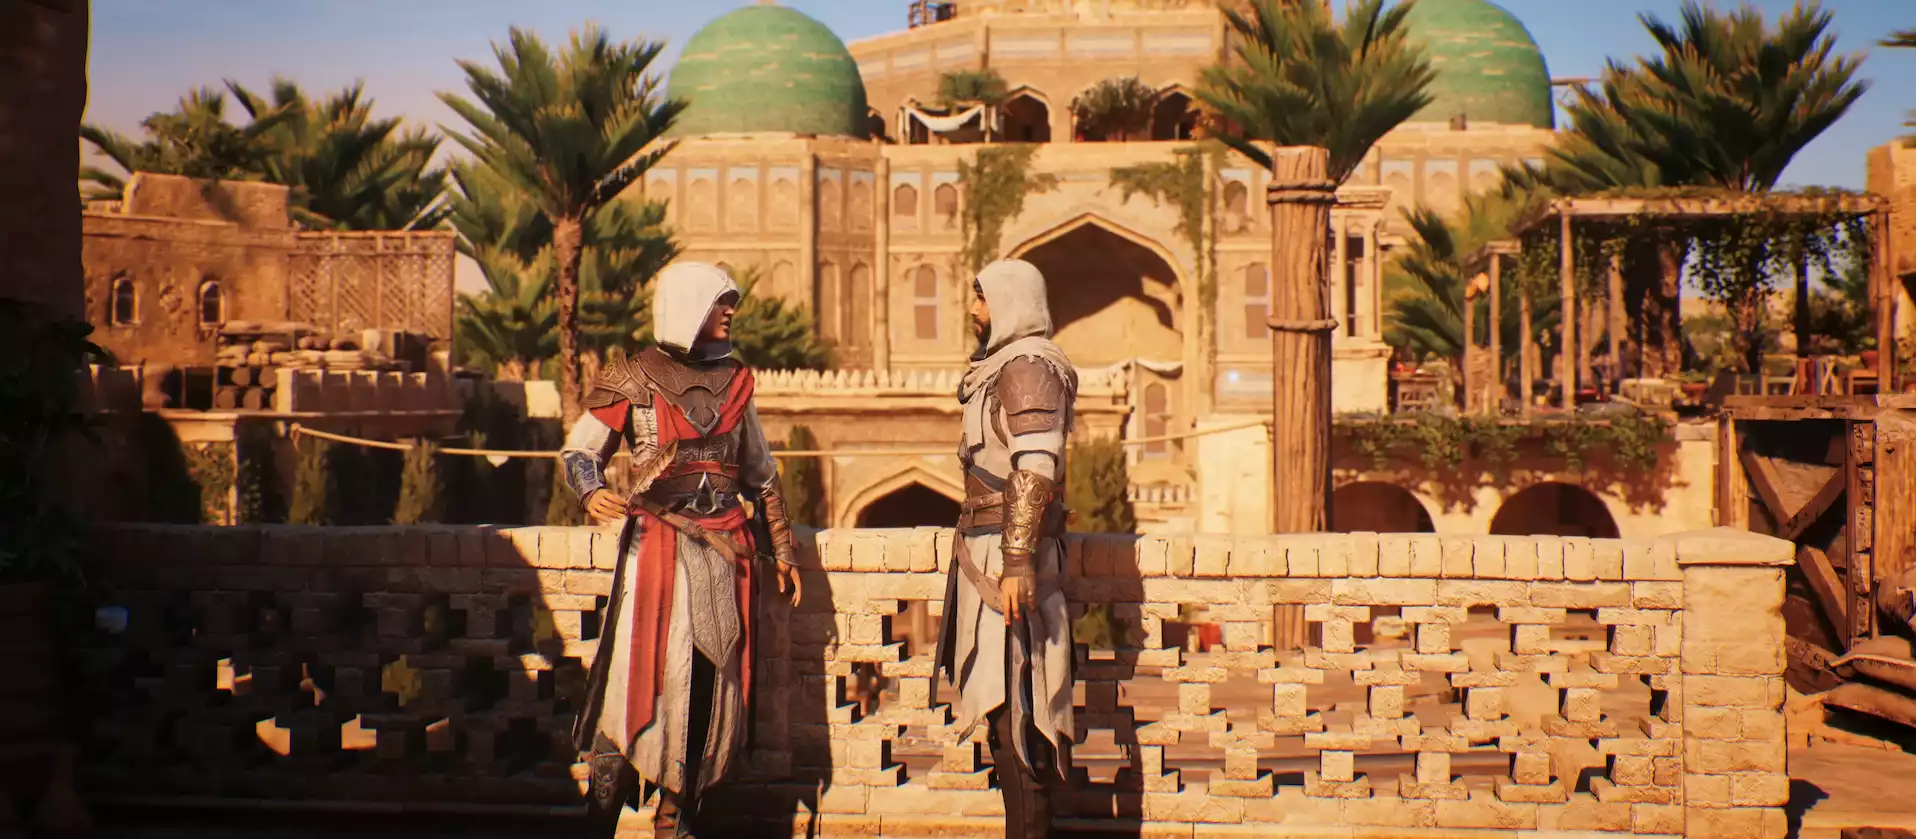 Assassin's Creed Mirage PC System Requirements: Everything You Need to Know